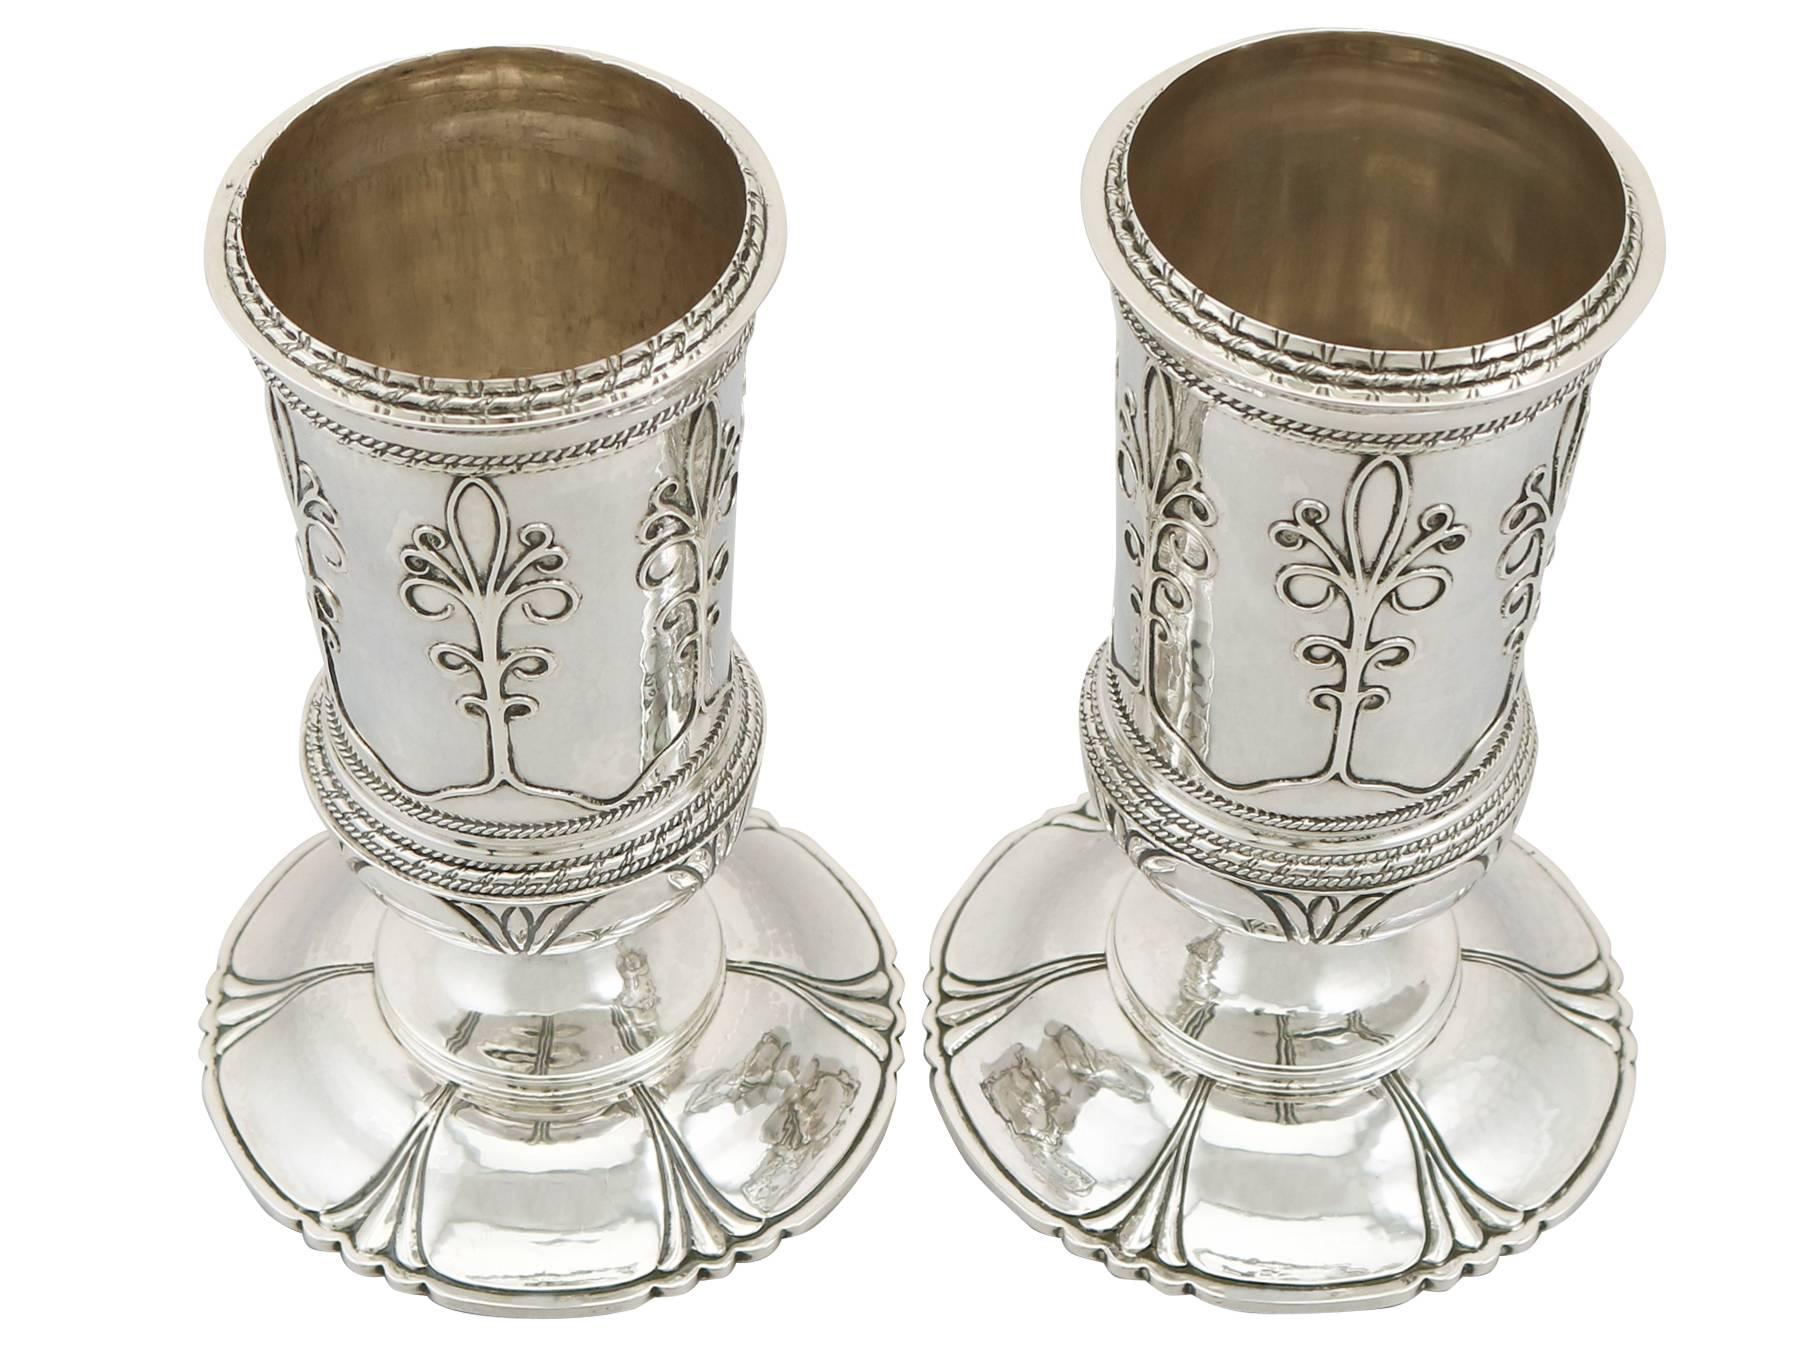 An exceptional, fine and impressive pair of antique George V English sterling silver vases made in the Arts and Crafts style by Guild of Handicraft; an addition to our ornamental silverware collection

These exceptional antique George V sterling